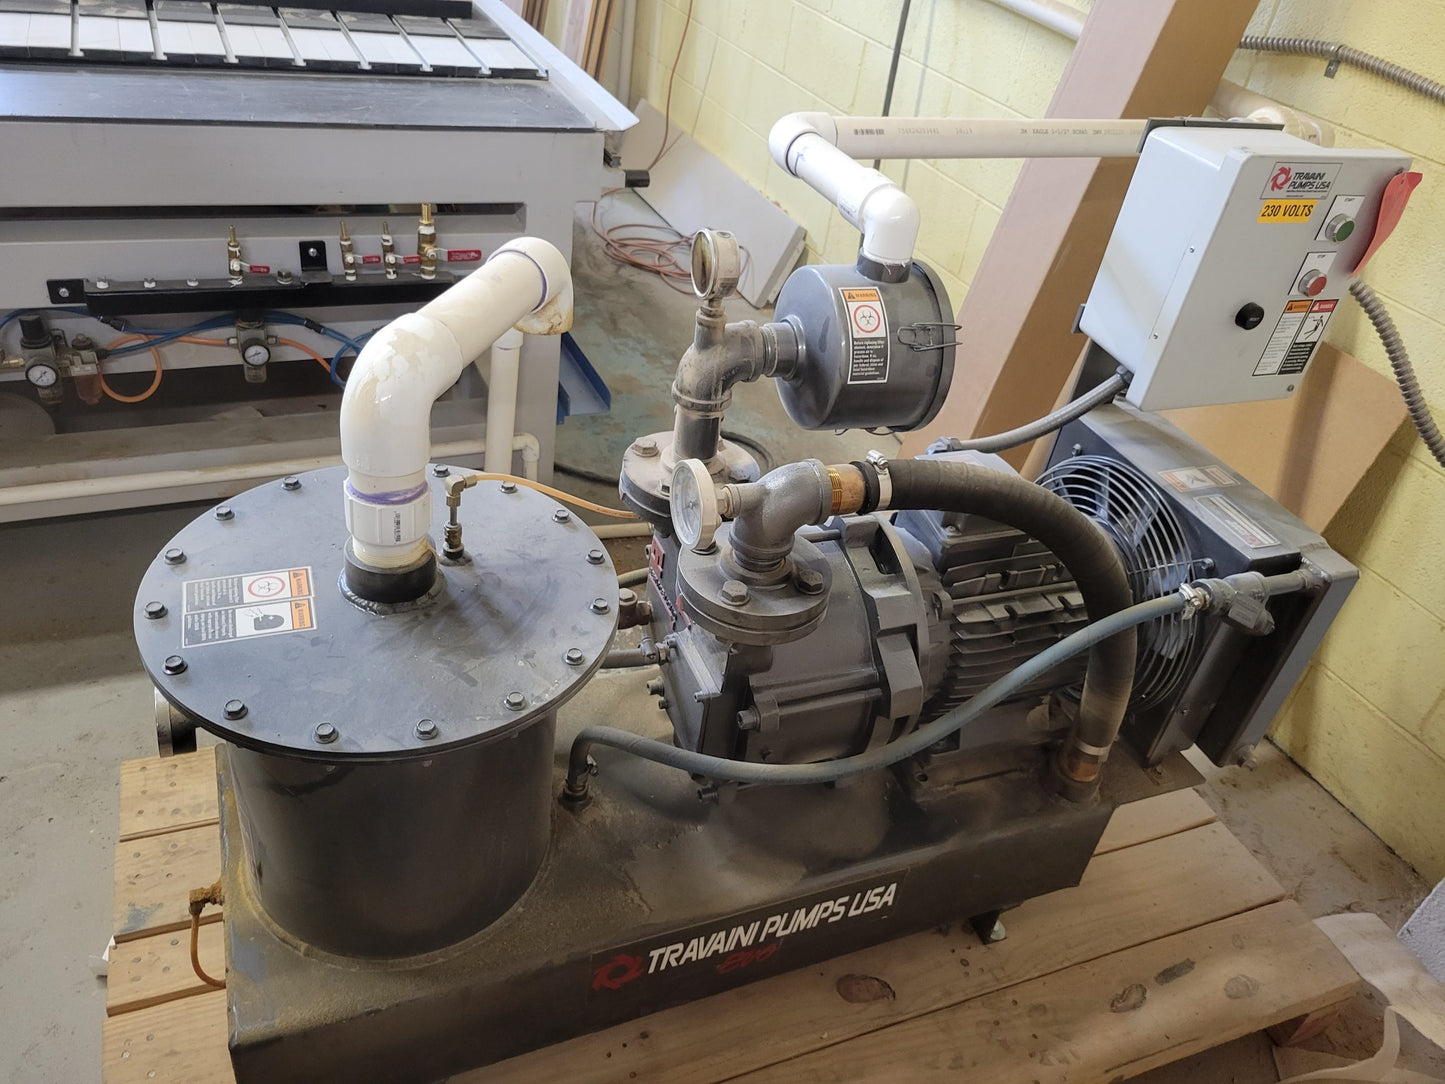 2008 Camwood CNC Router with Pump